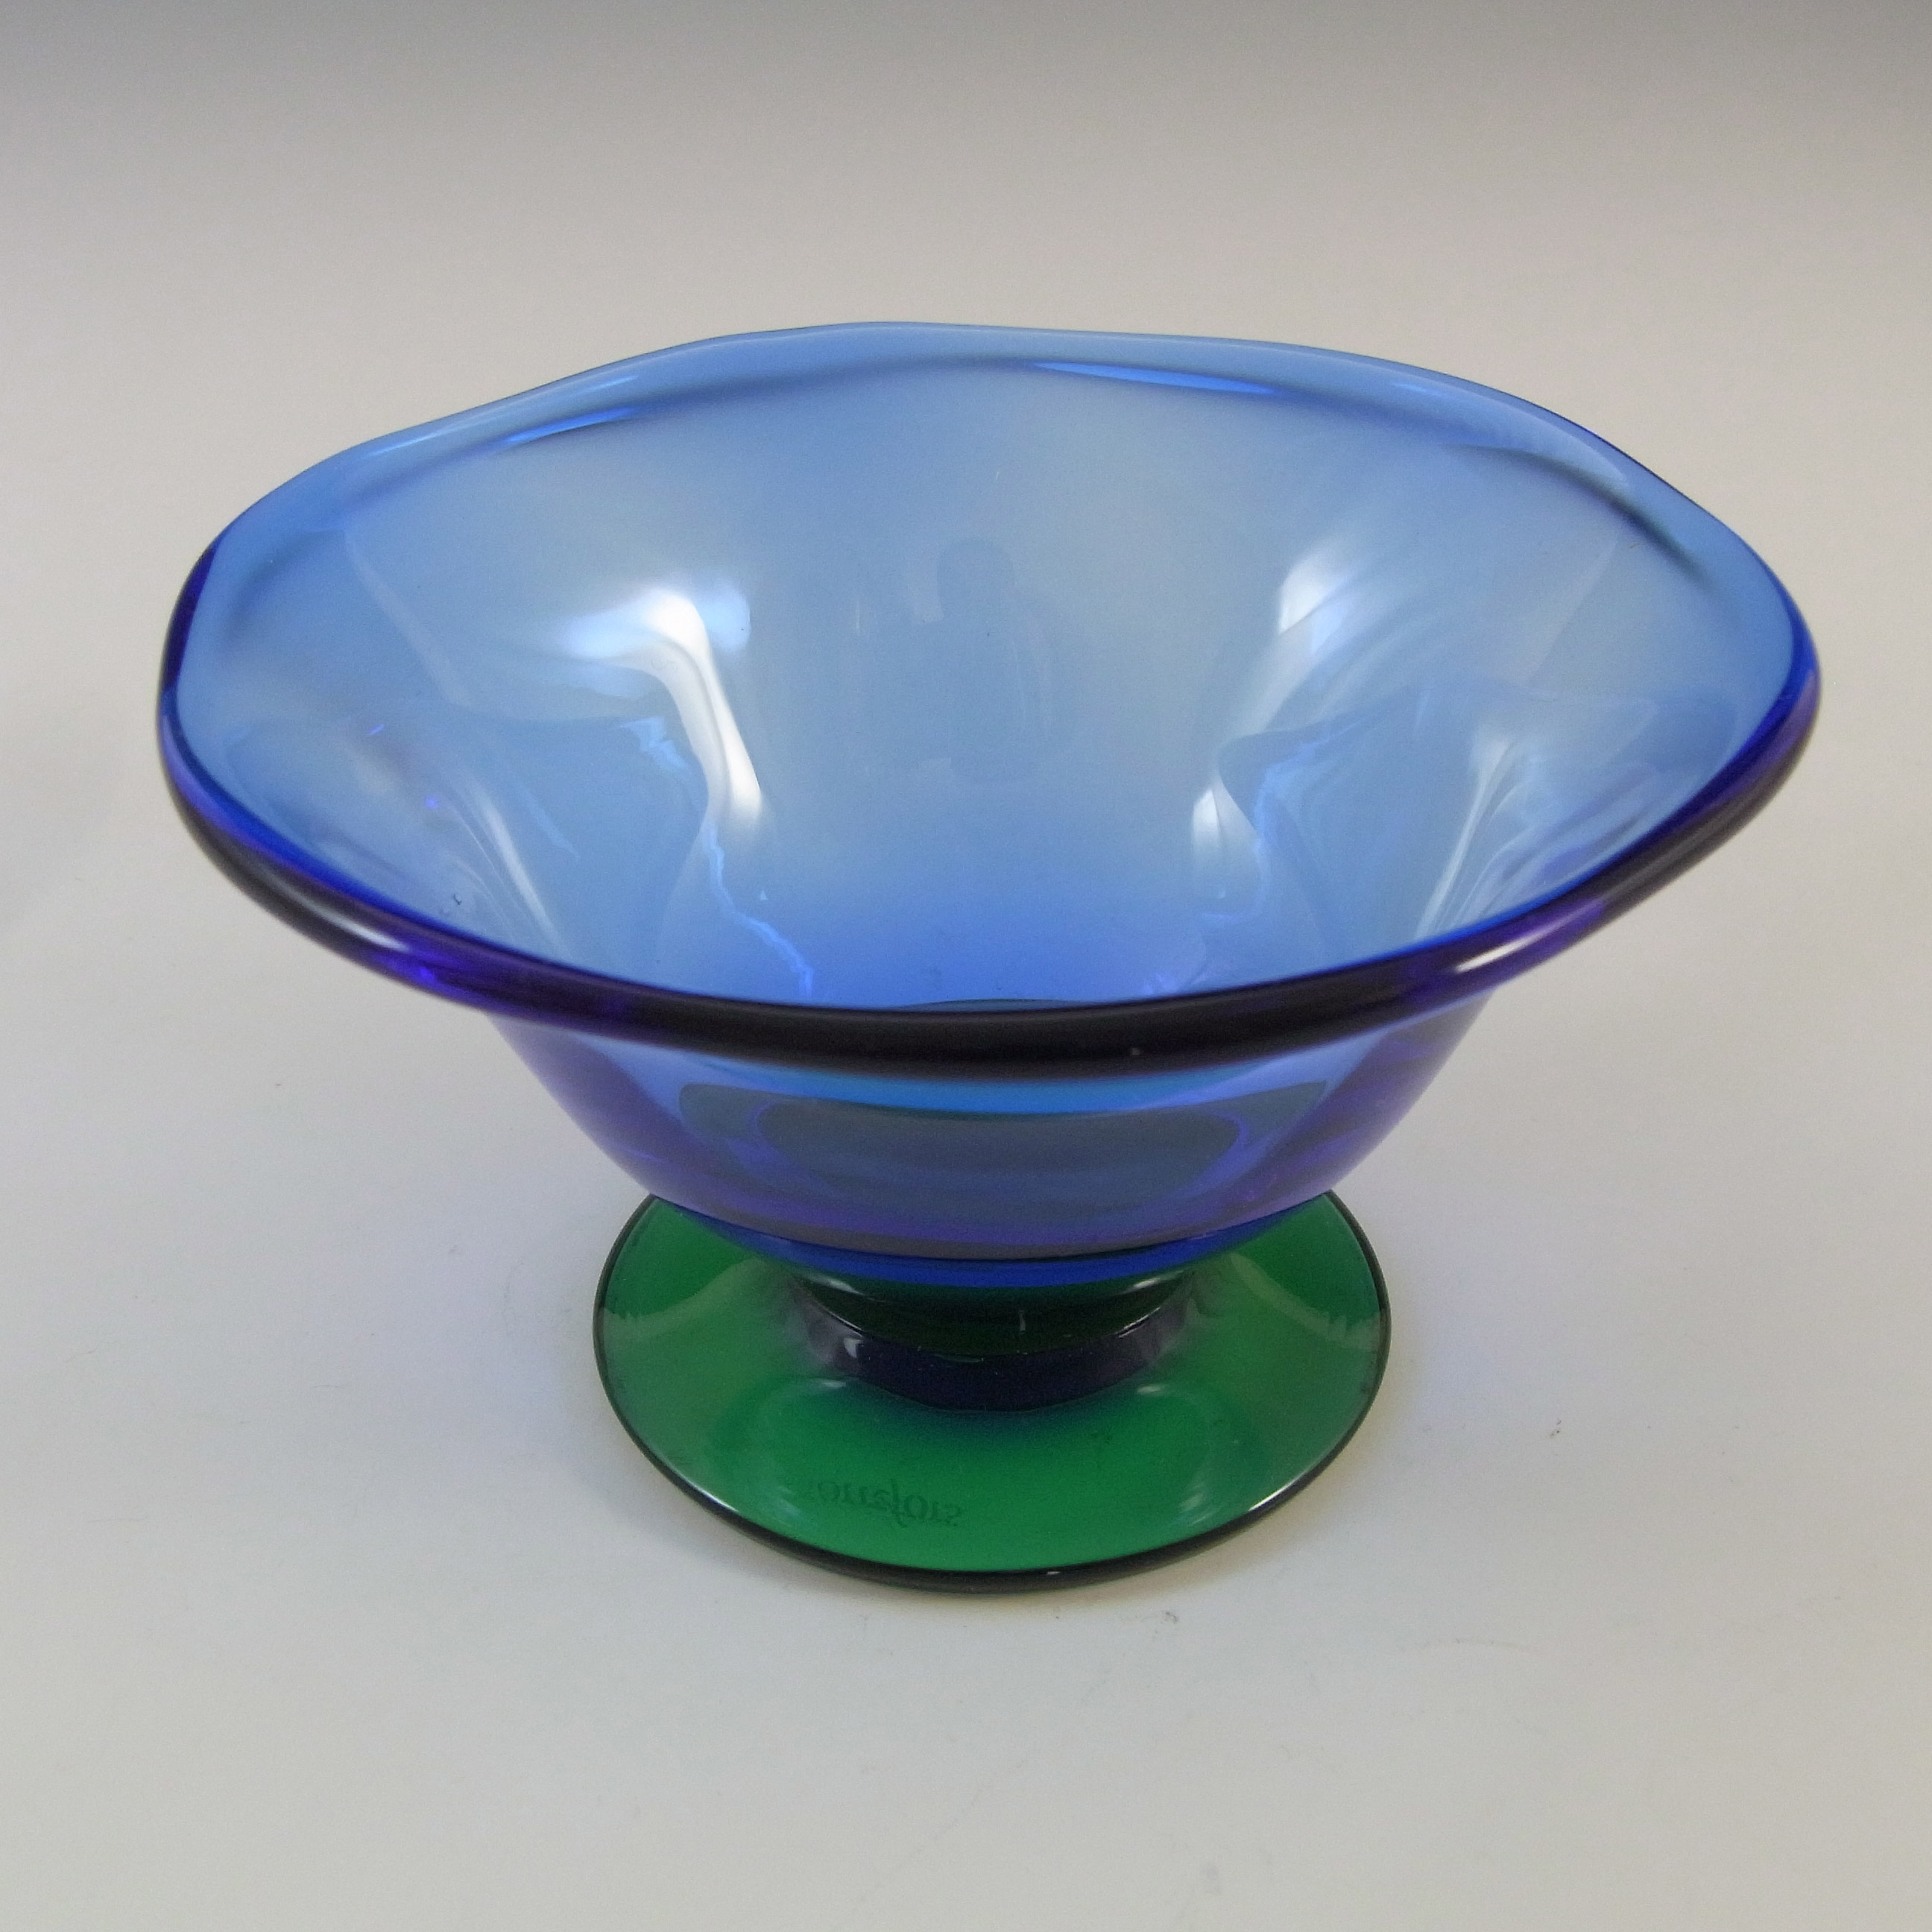 Orrefors Glass "Louise" Creamer & Bowl by Erika Lagerbielke - Click Image to Close